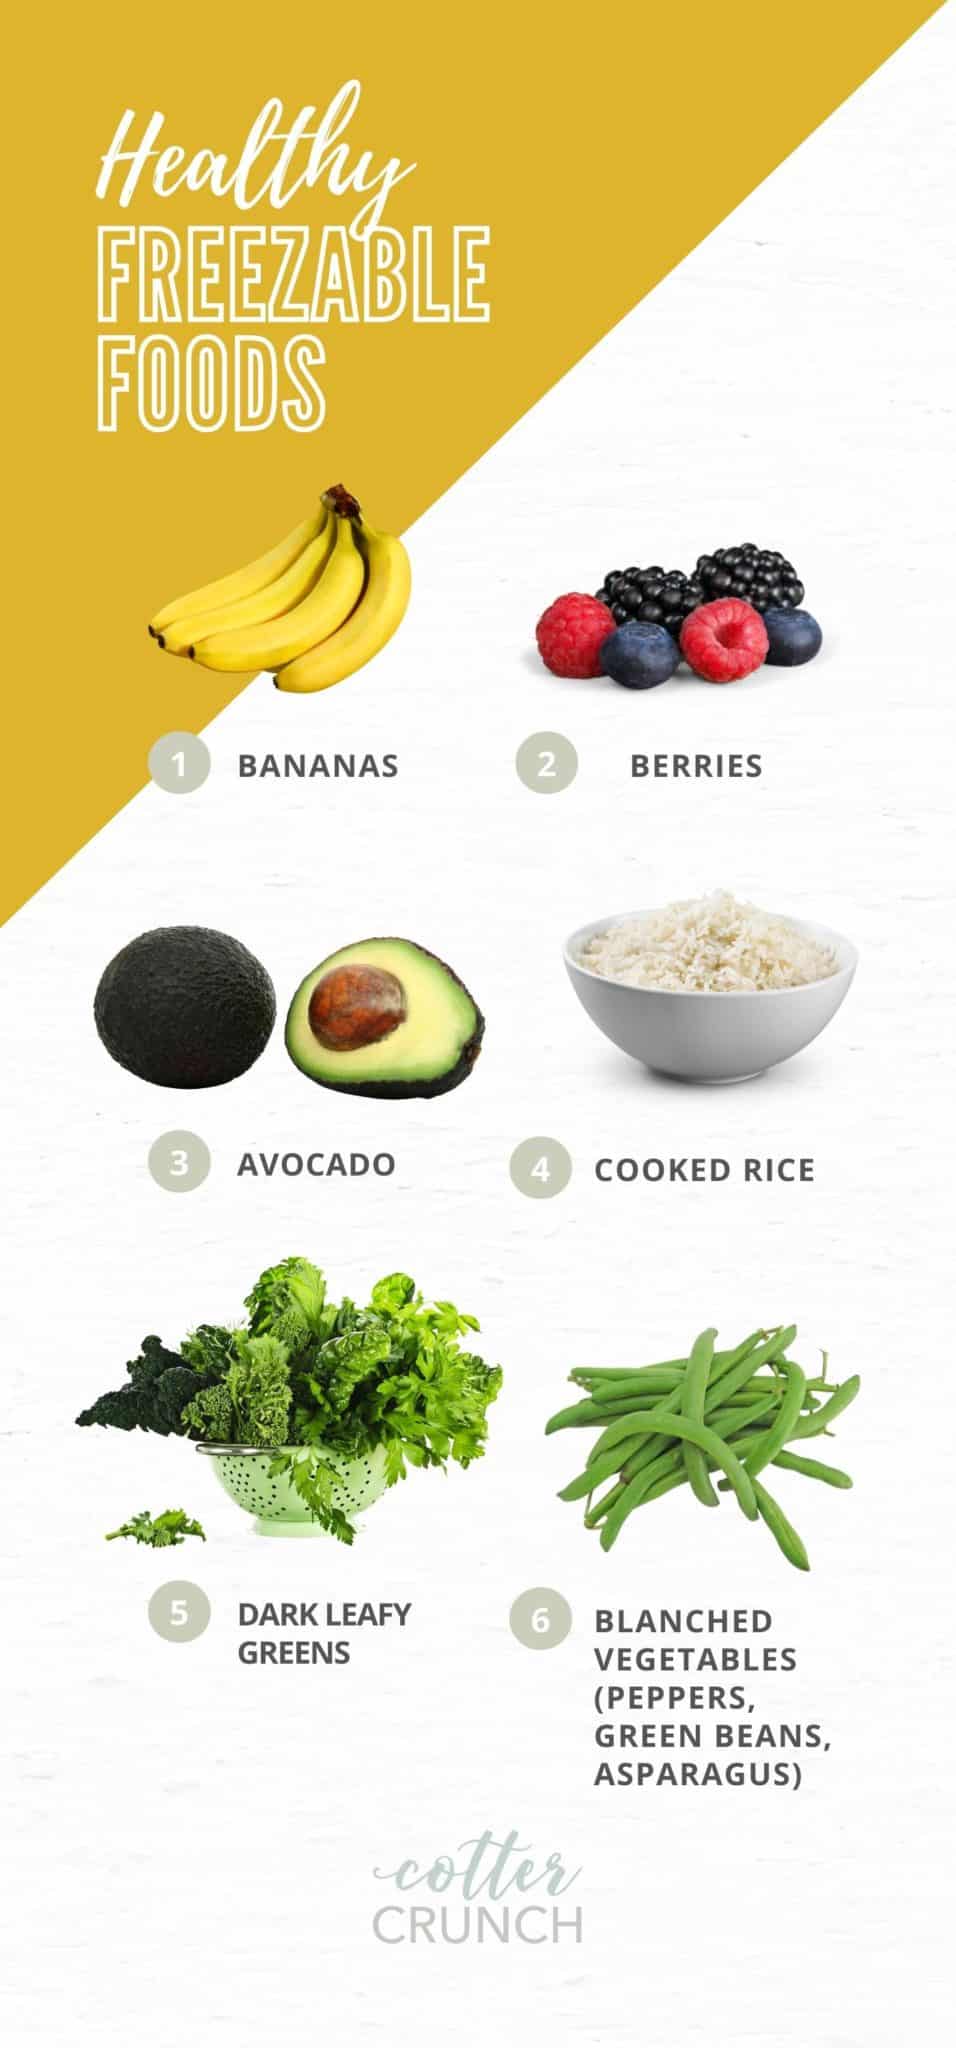 healthy freezable foods graphic with bananas, berries, avocado, cooked rice, dark leafy greens, and blanched vegetables